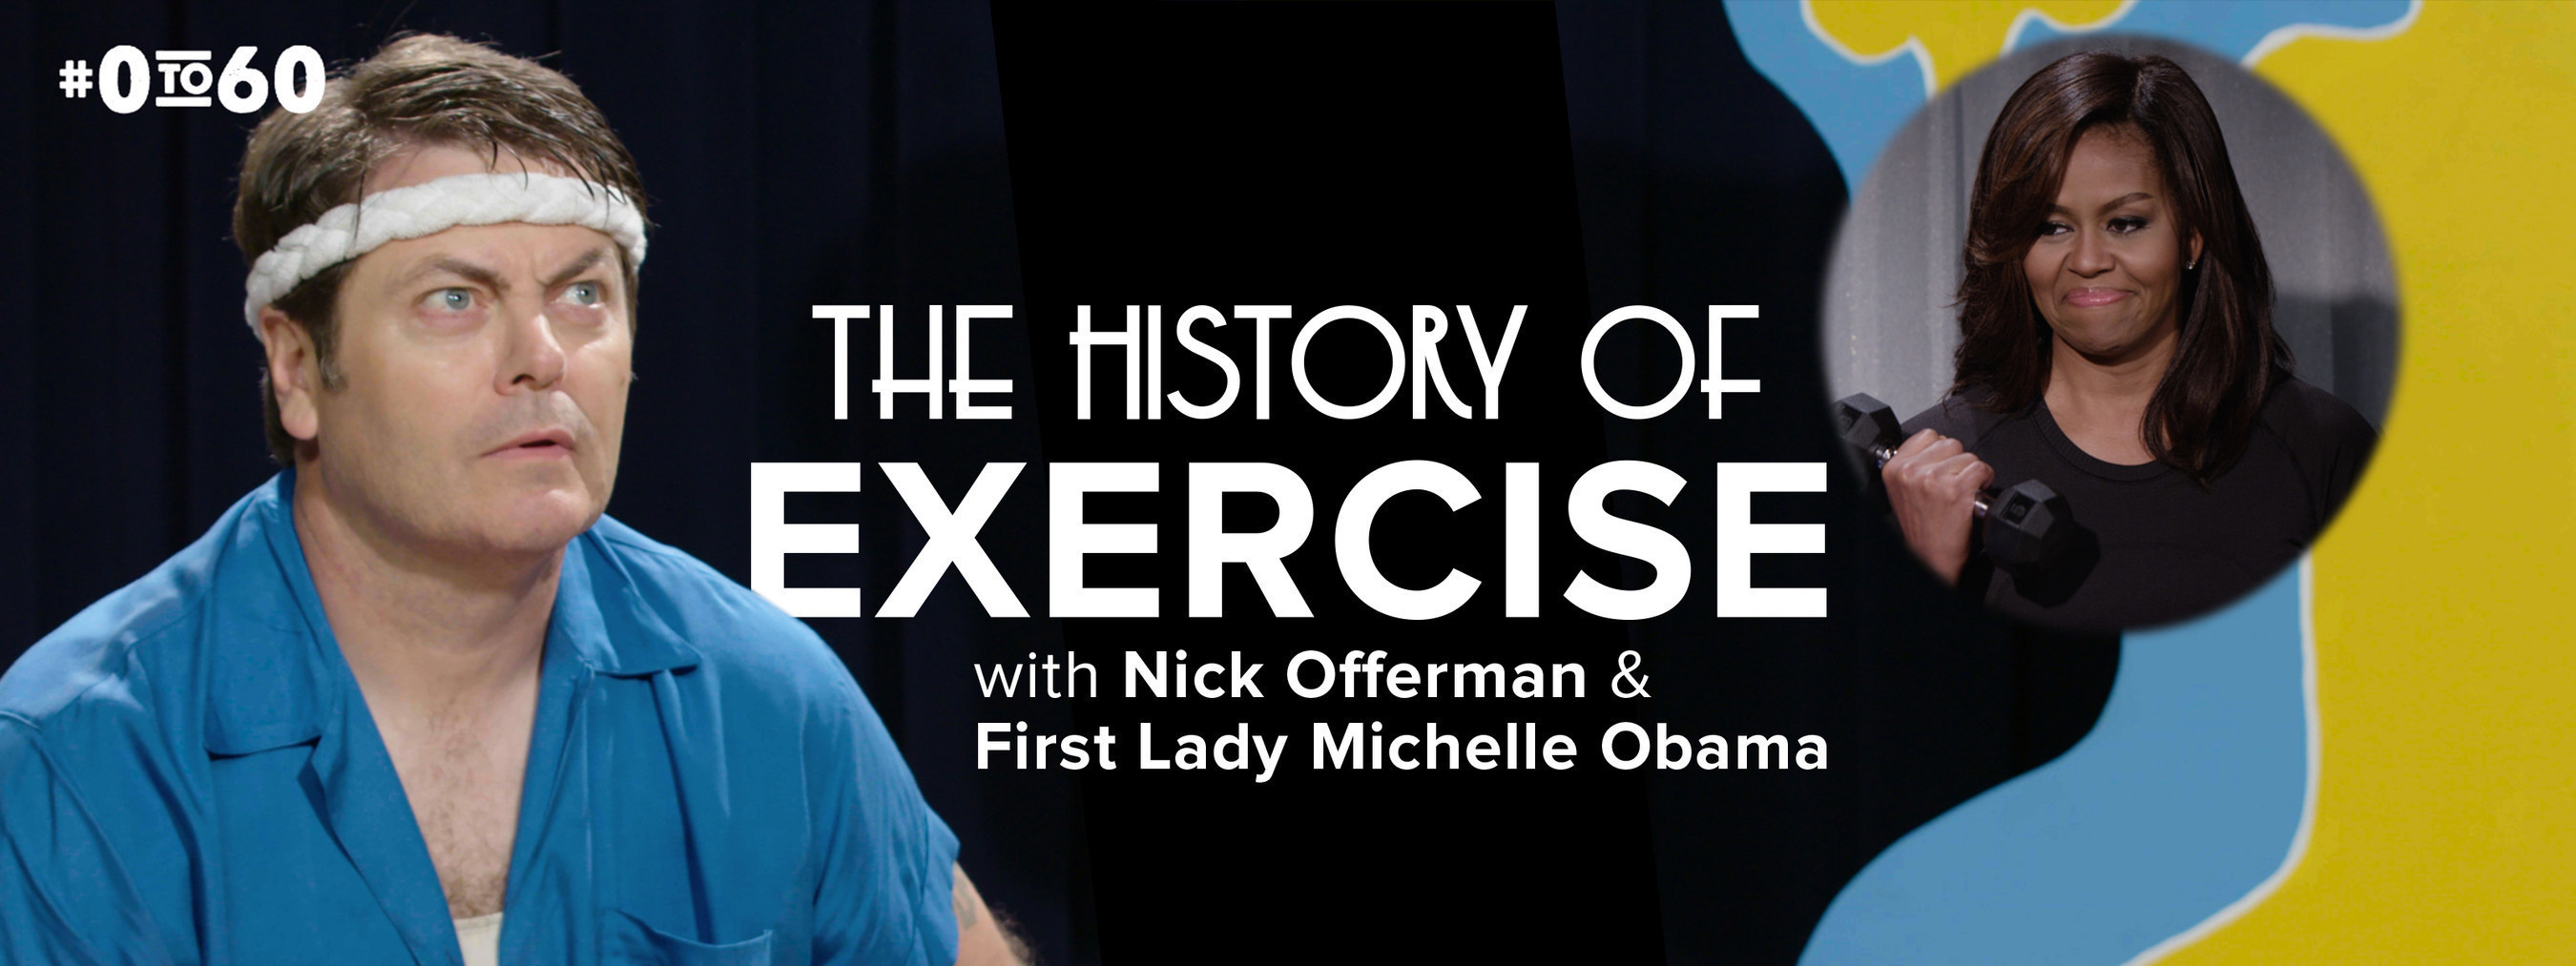 First Lady Michelle Obama & Nick Offerman join the #0to60 Campaign to celebrate the 60th Anniversary of the President's Council on Fitness, Sports & Nutrition.